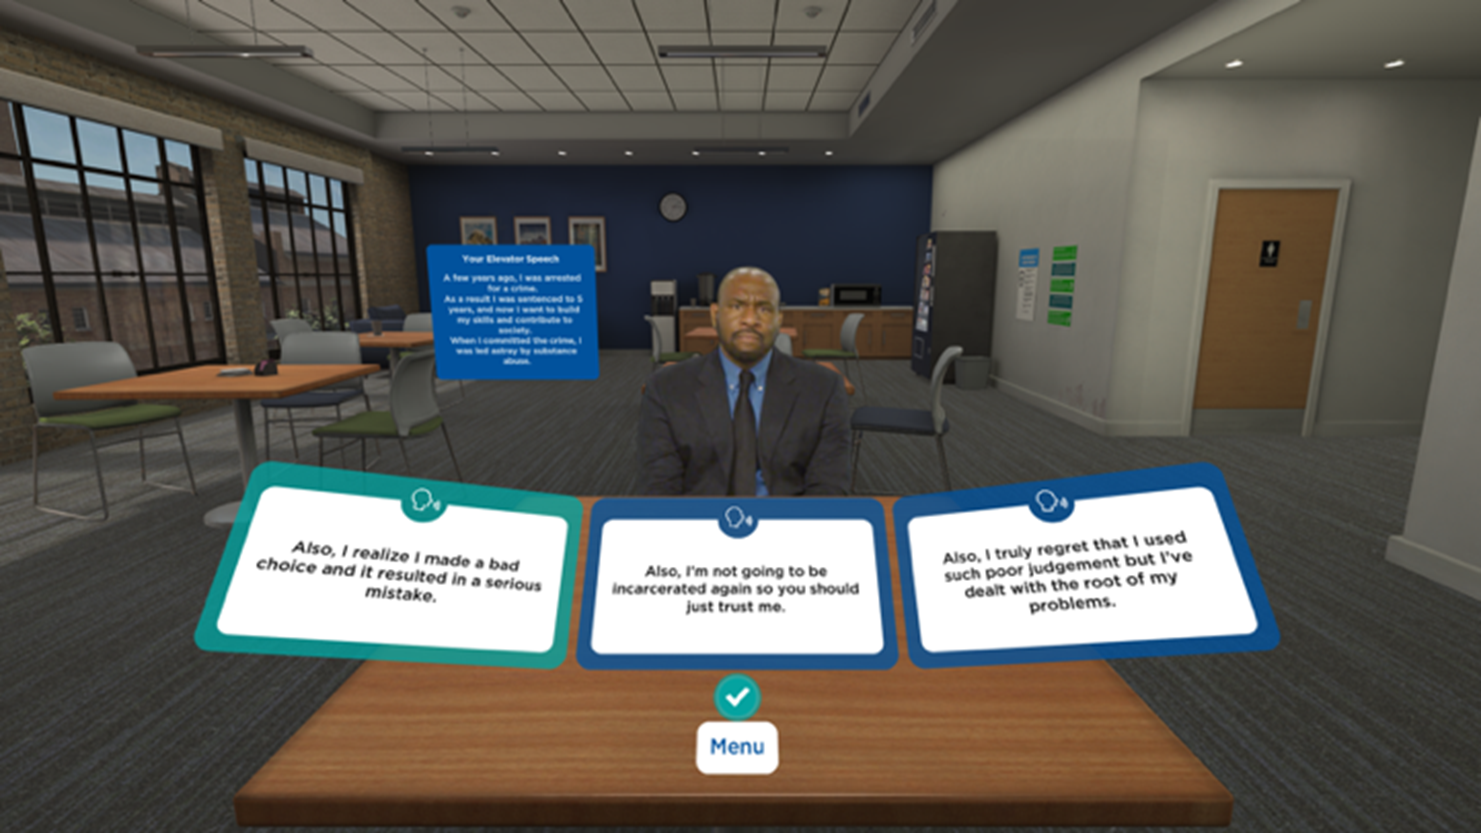 Screenshot from Project Overcome VR program of a man sitting at interview table, with a menu of text boxes that the user can select from